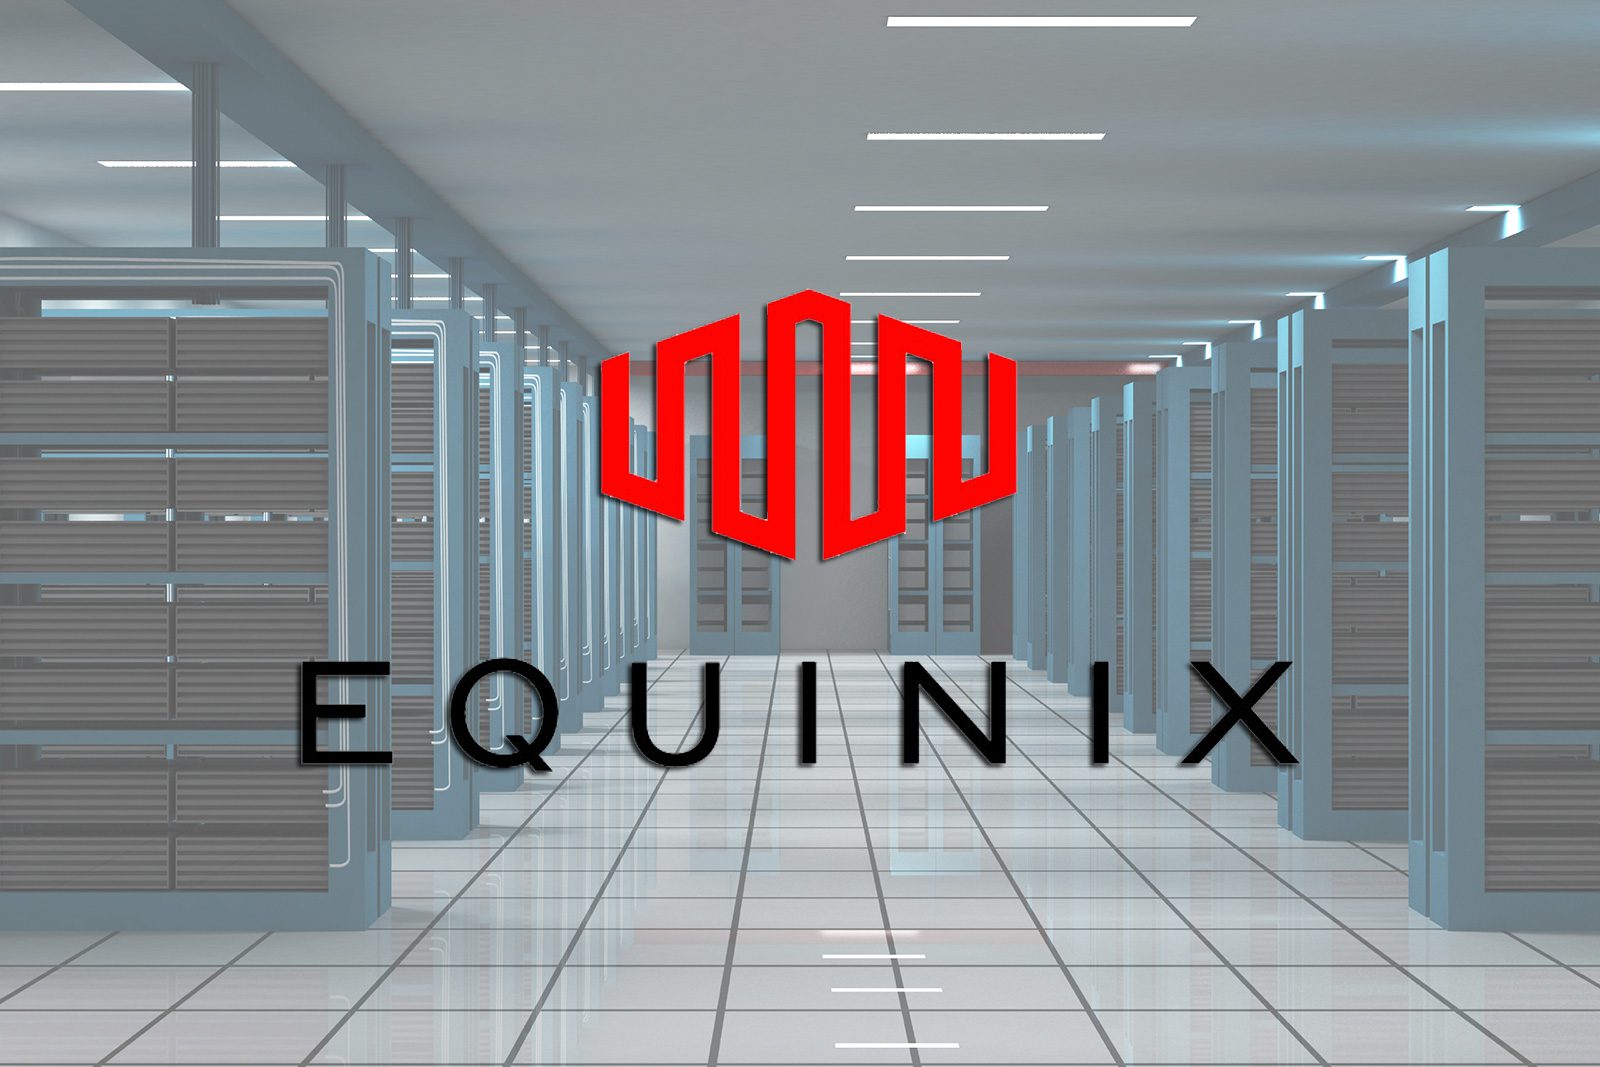 Equinix CEO Resigns and Executive Chairman Assumes Interim CEO Position